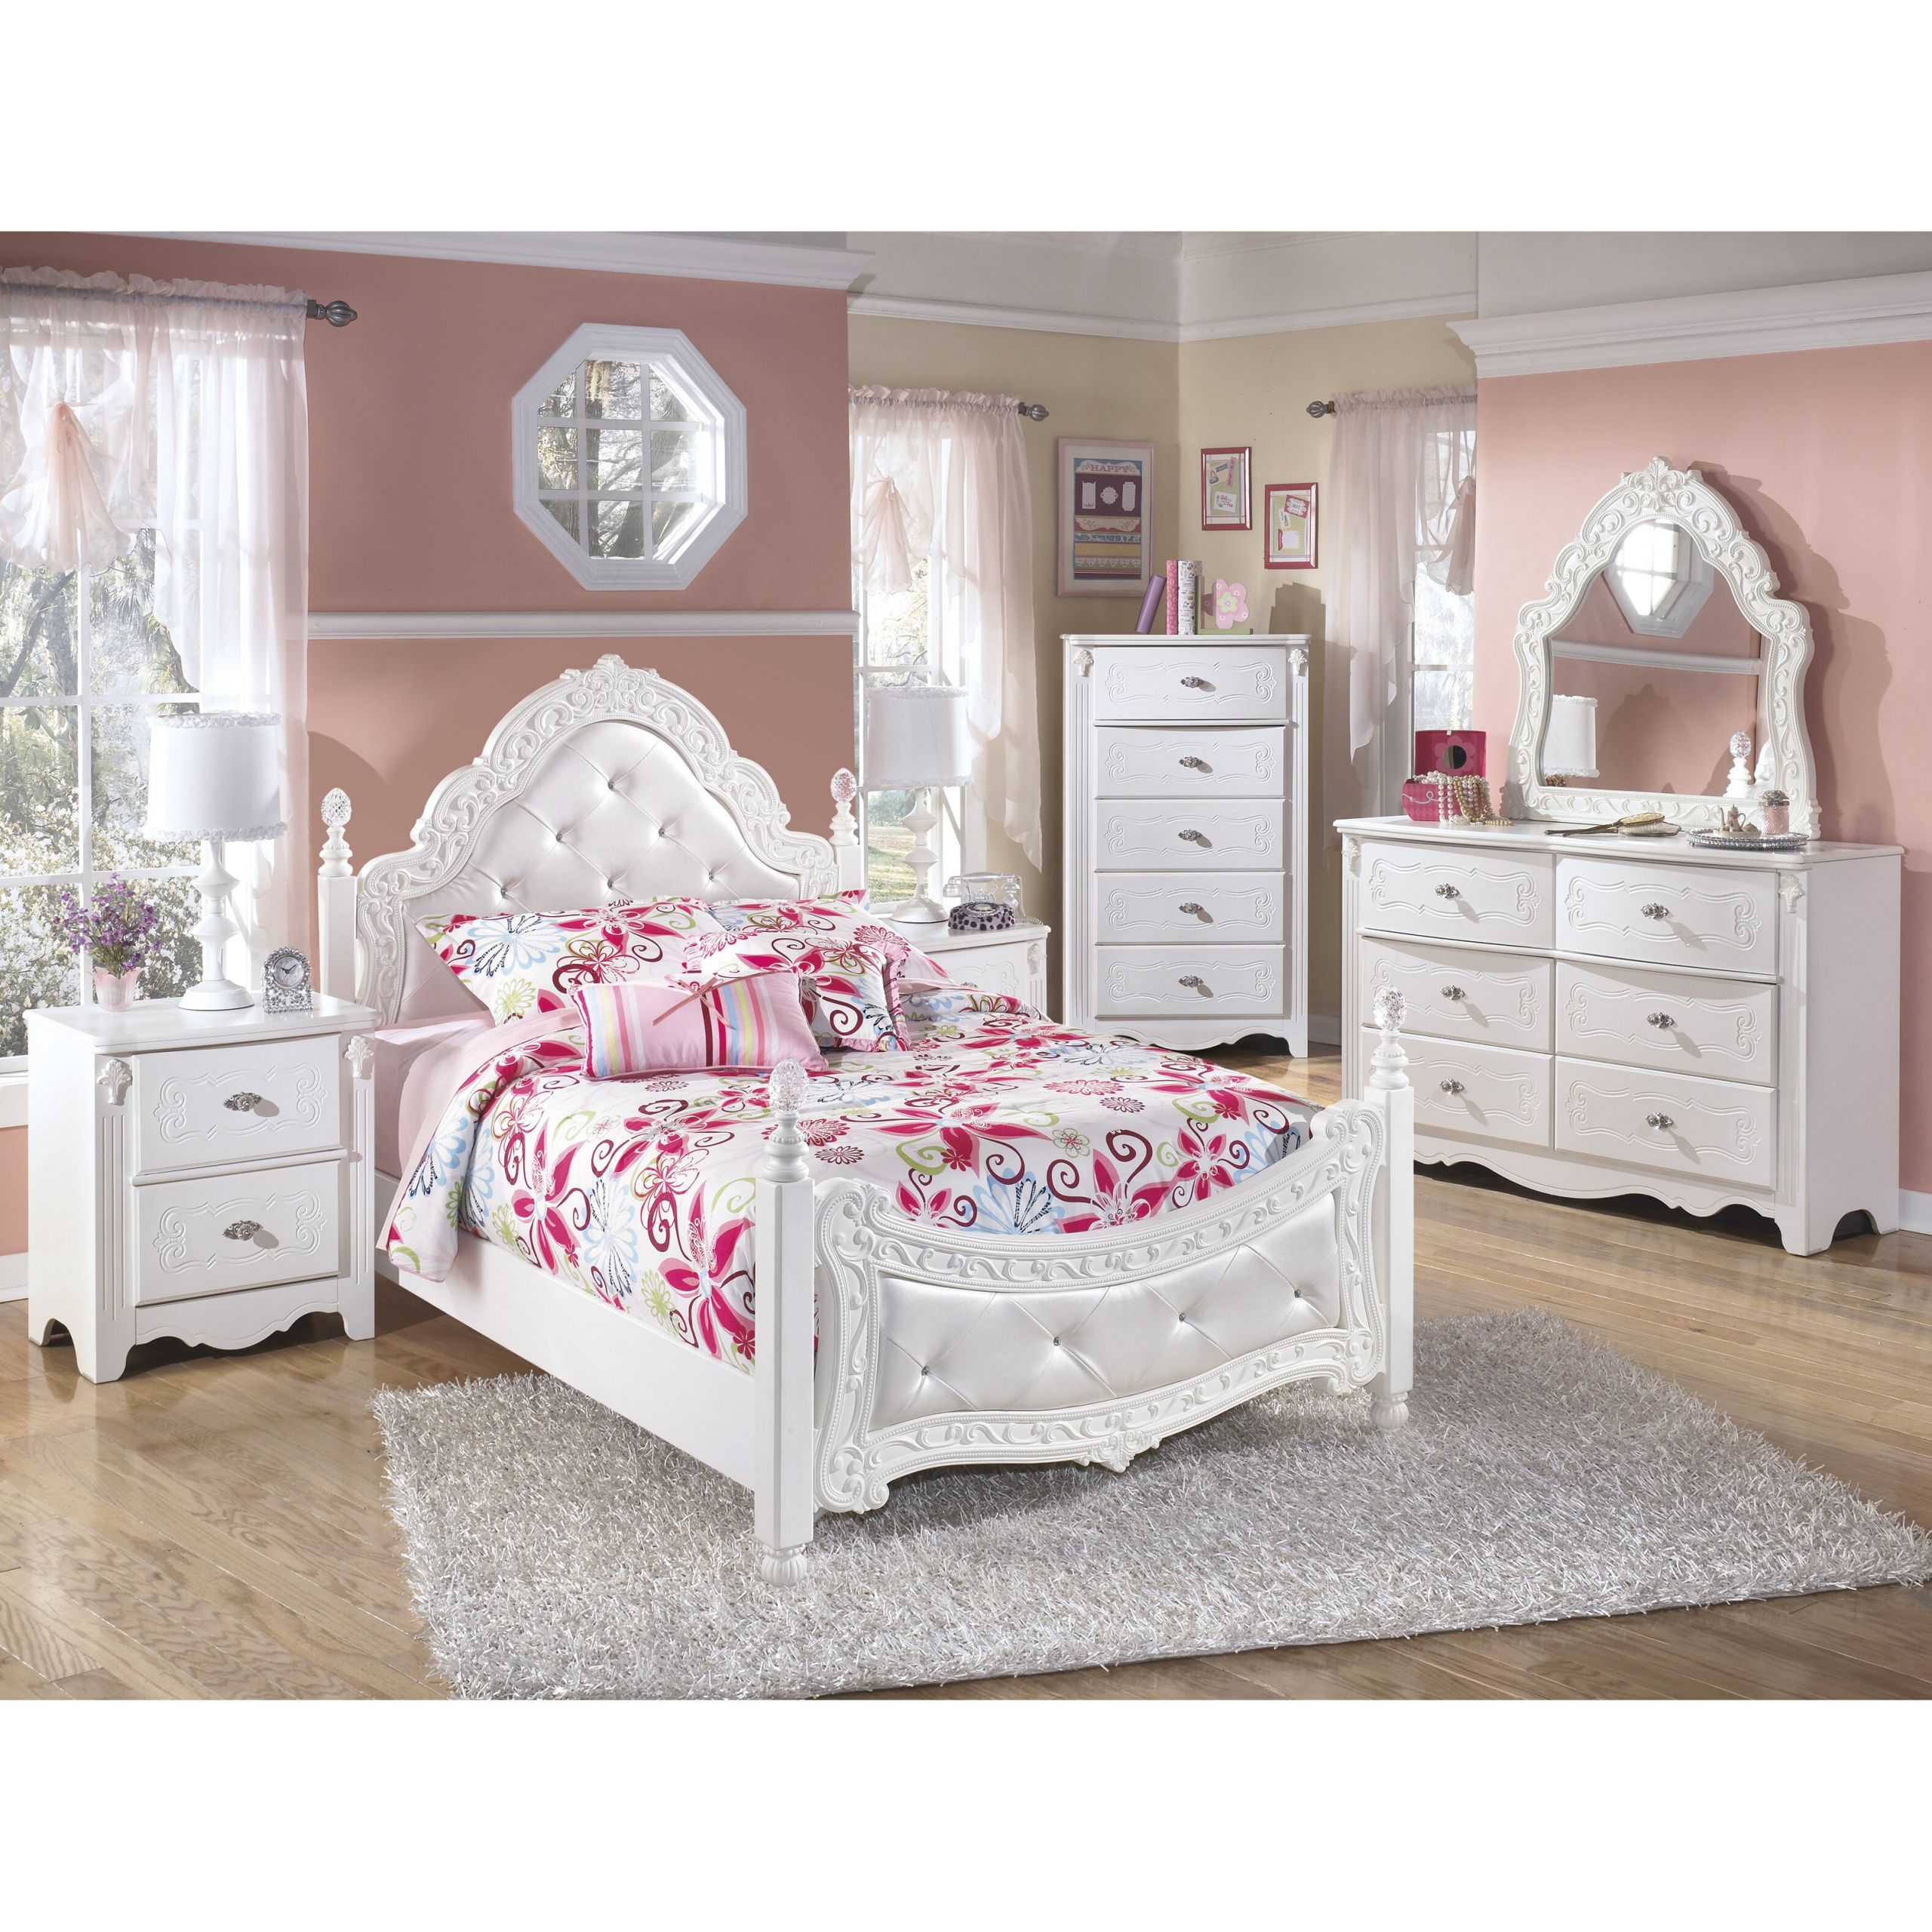 Kids Bedroom Sets
 Signature Design by Ashley Exquisite Four Poster